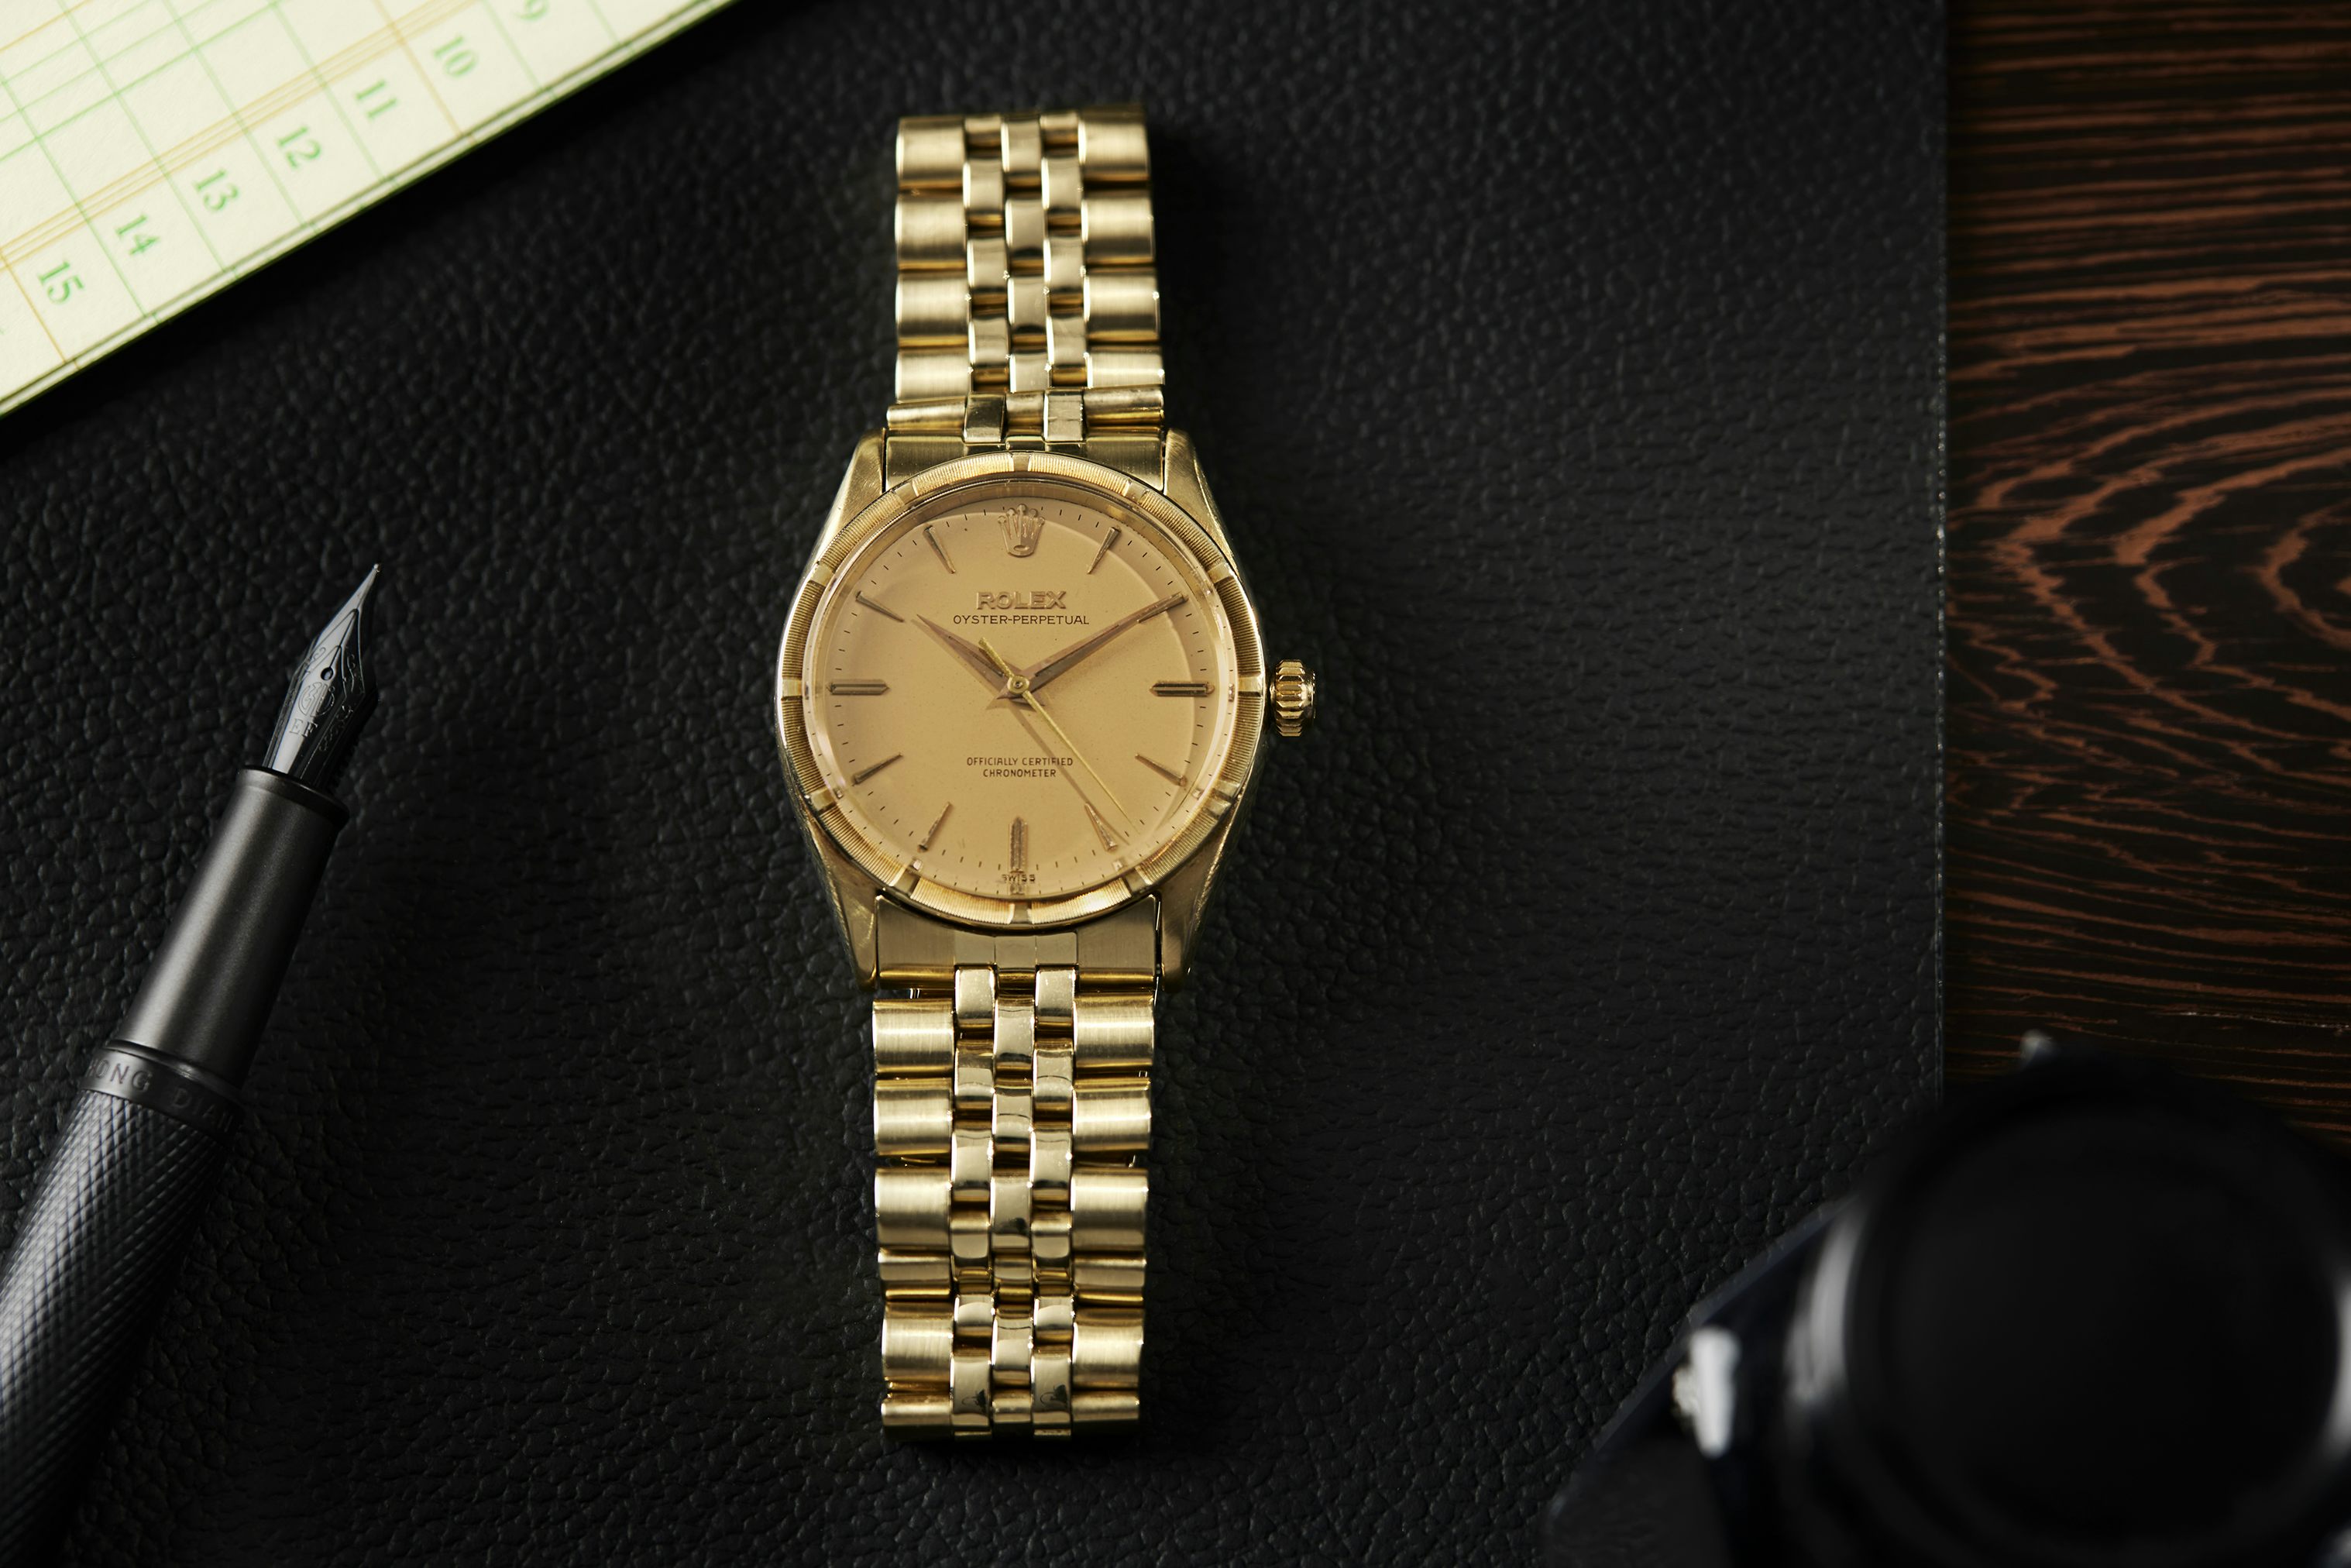 New Vintage Watches The HODINKEE Shop